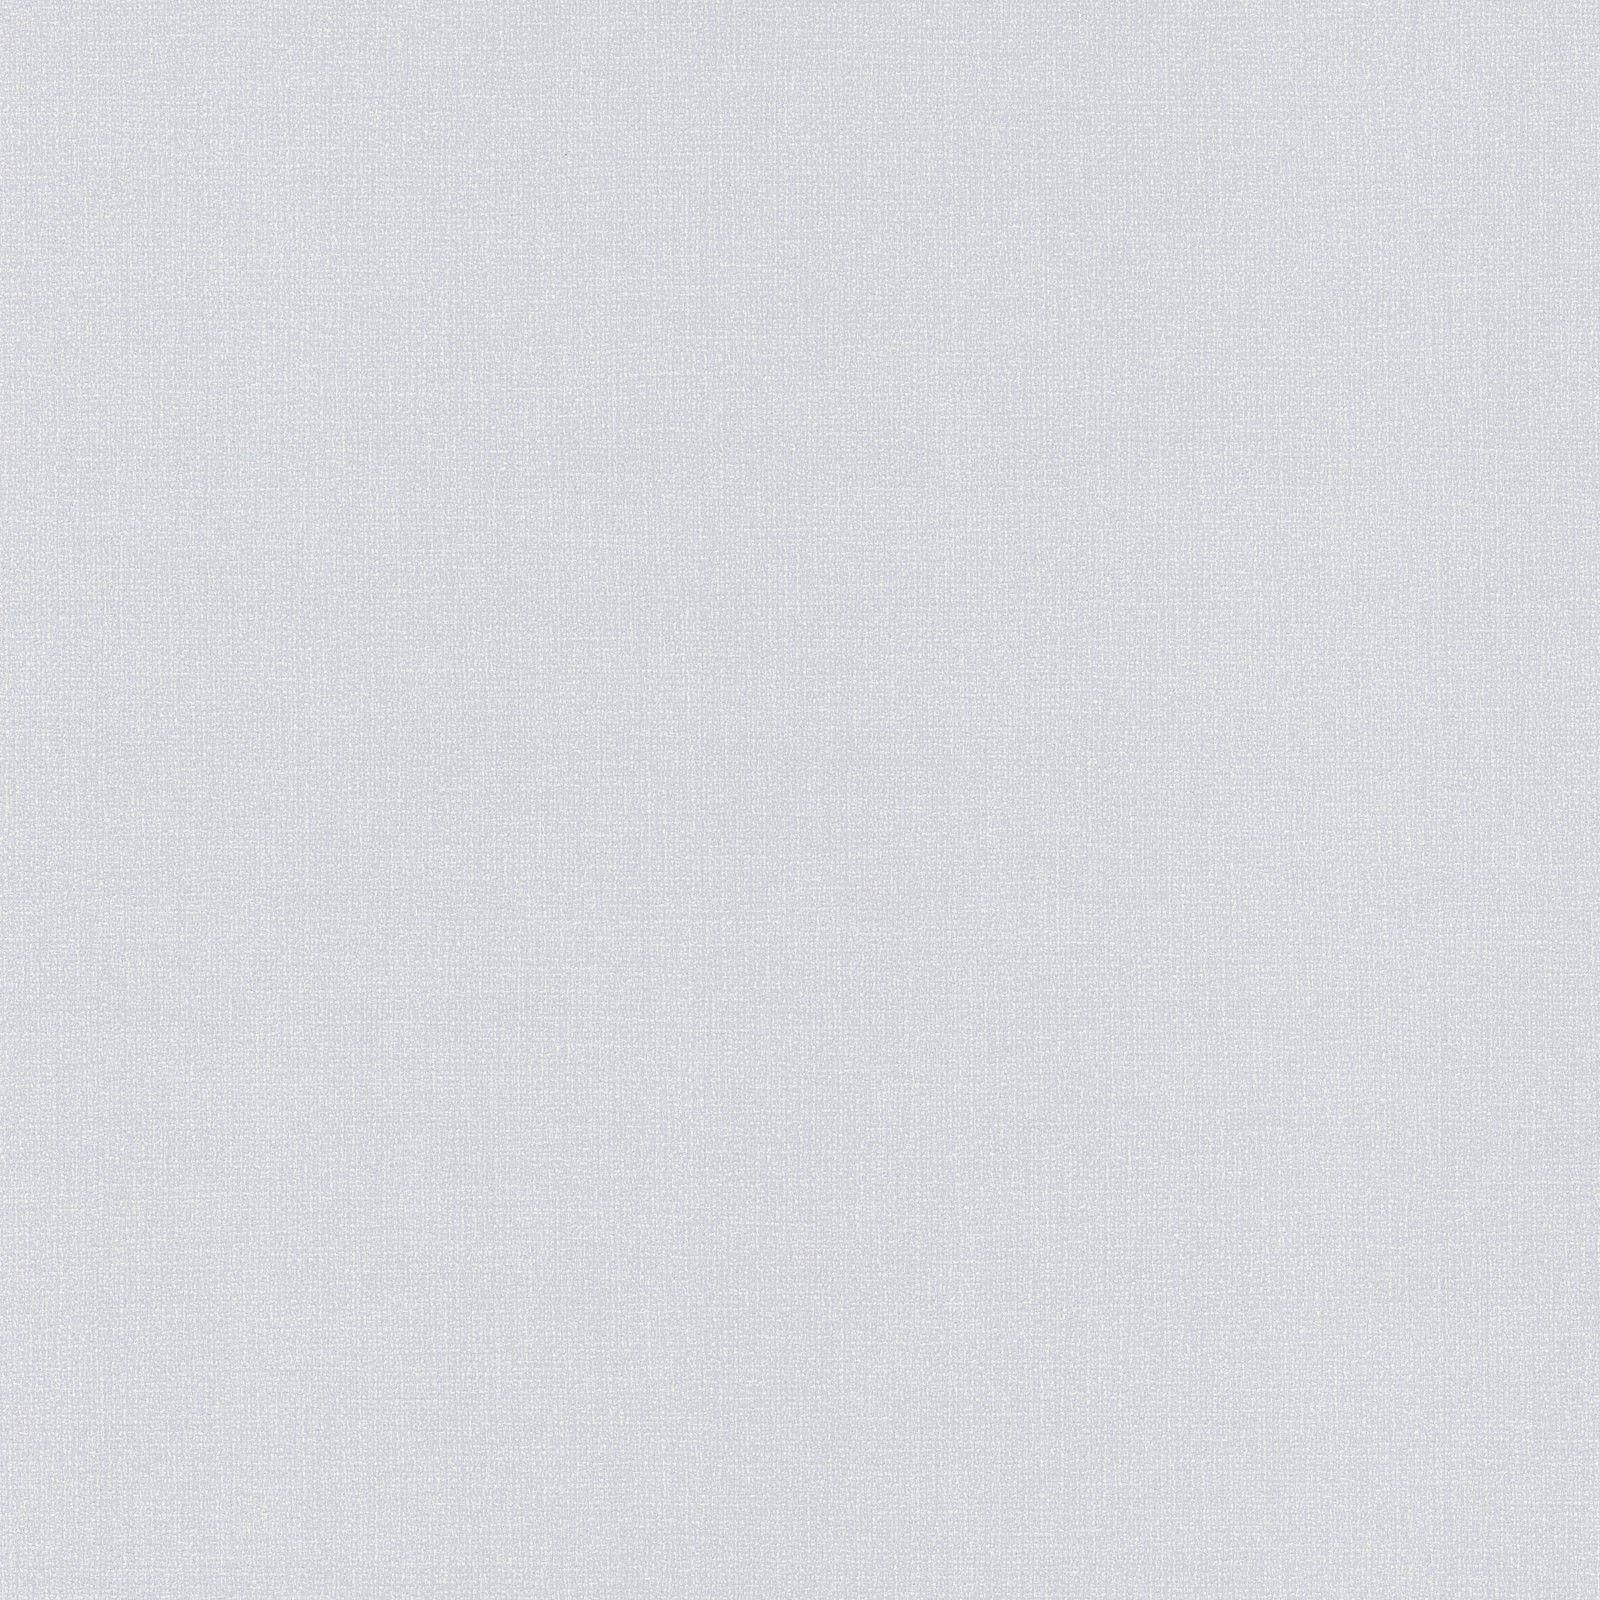 Light Gray Background With Subtle Texture Wallpaper